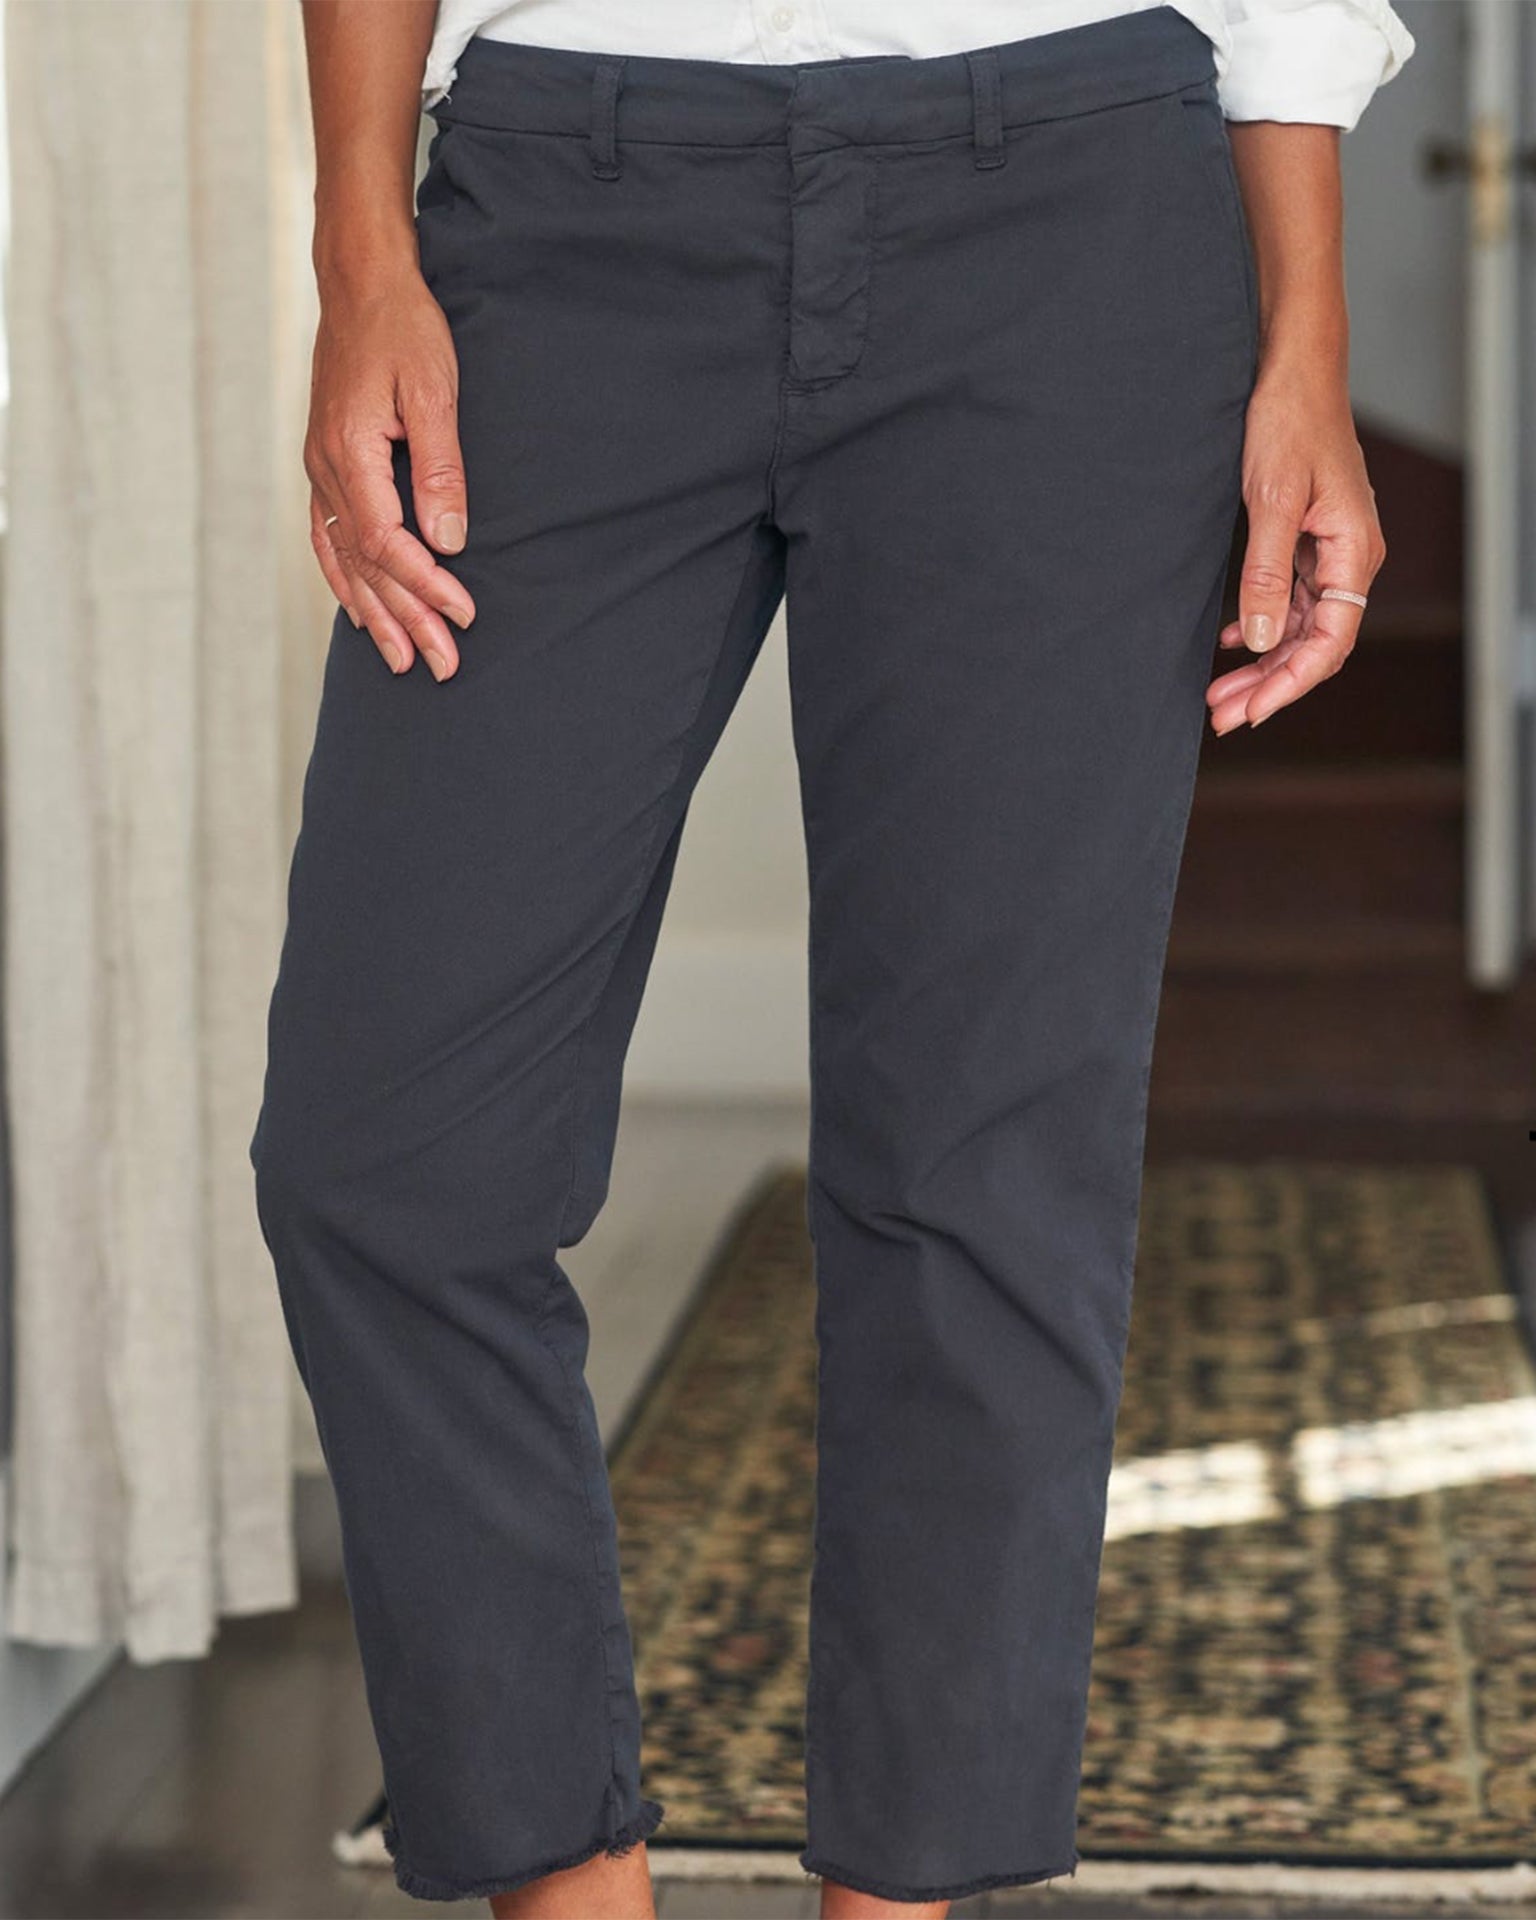 Wicklow Twill Pant in Washed Black